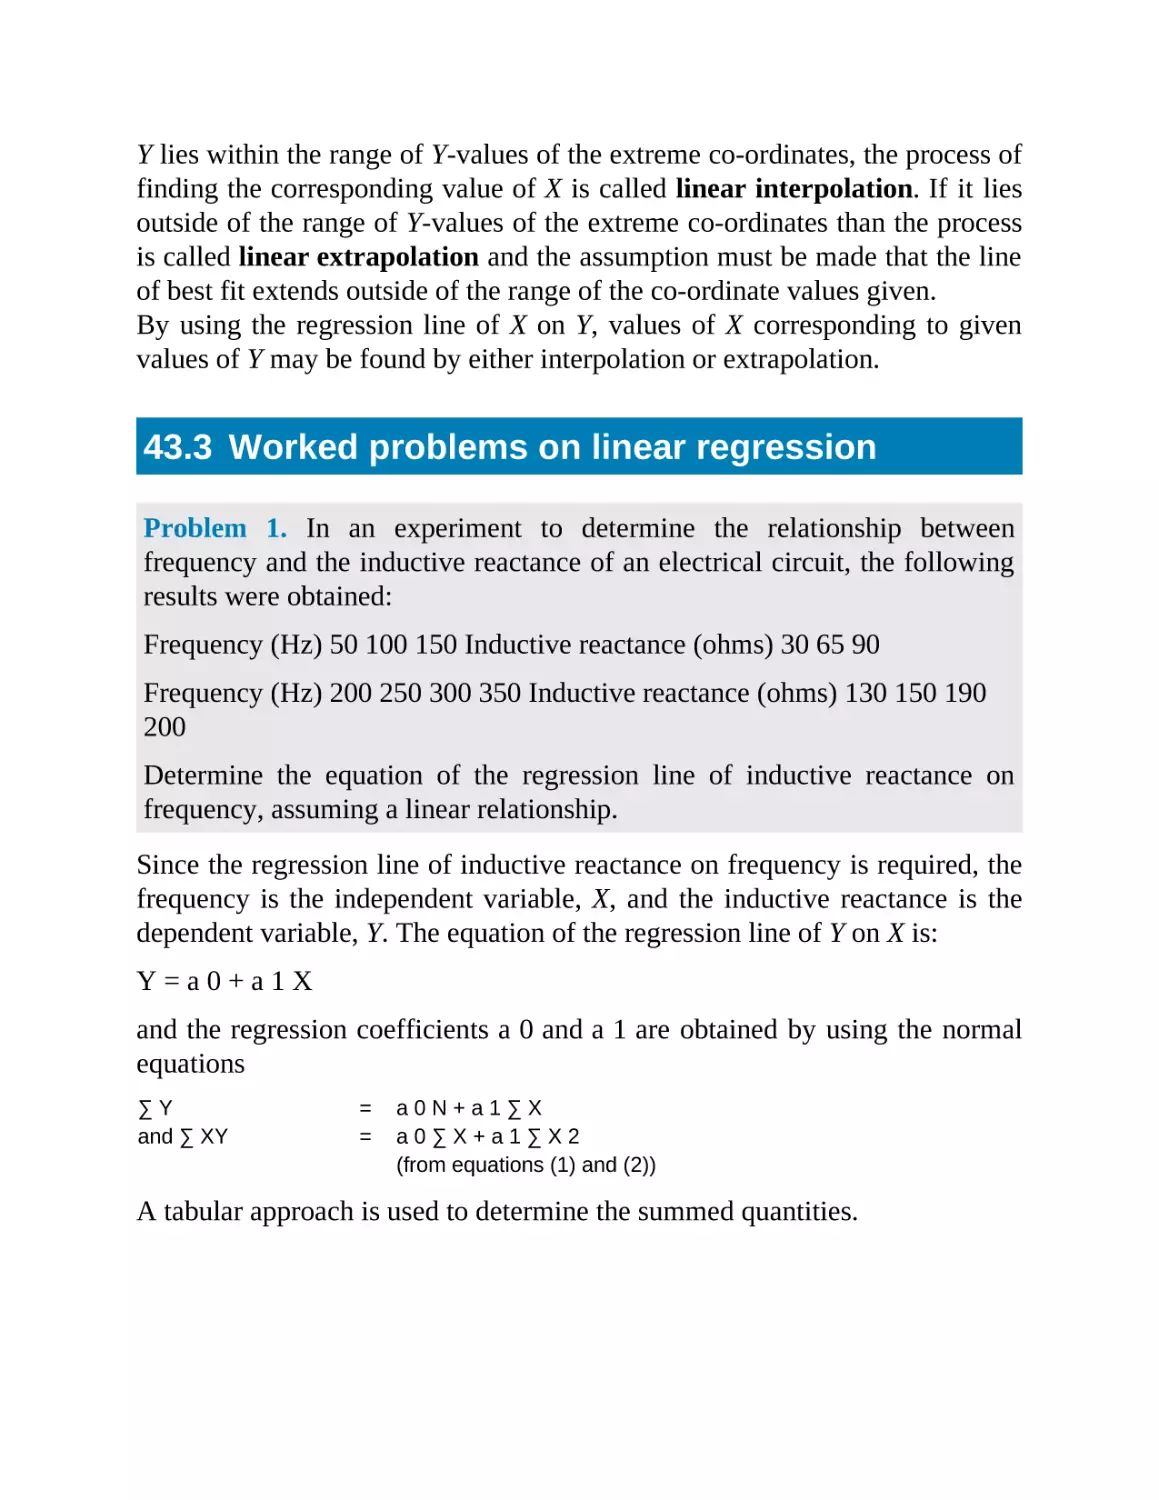 43.3 Worked problems on linear regression